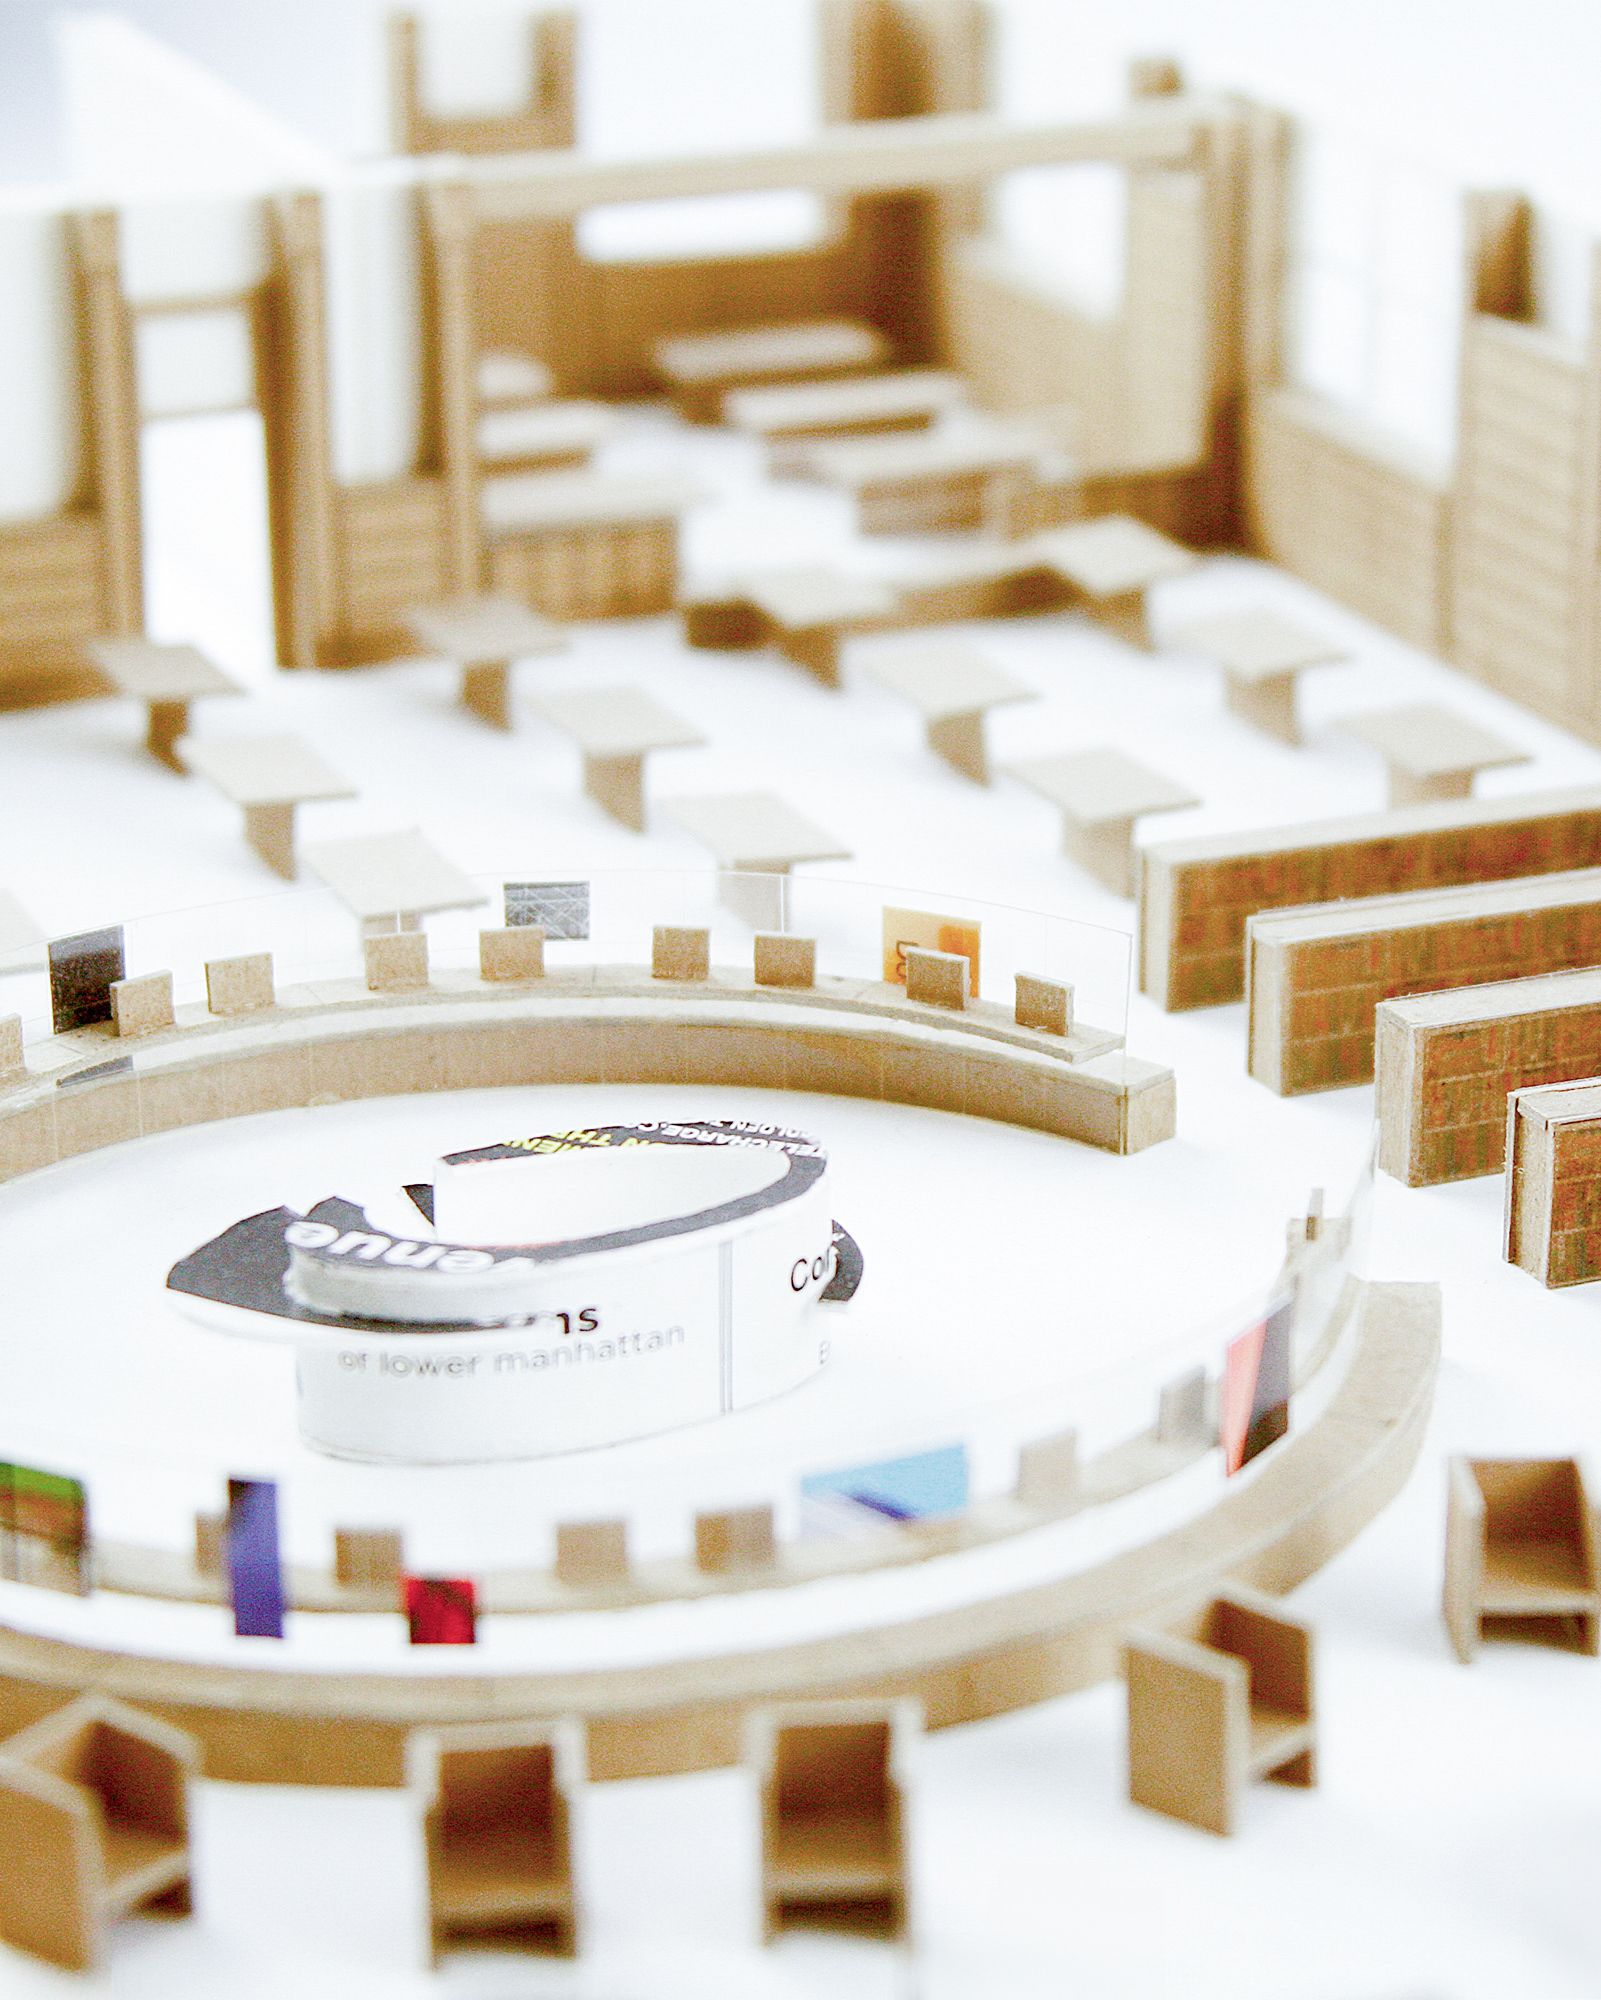 New Visions Public Libraries architectural model